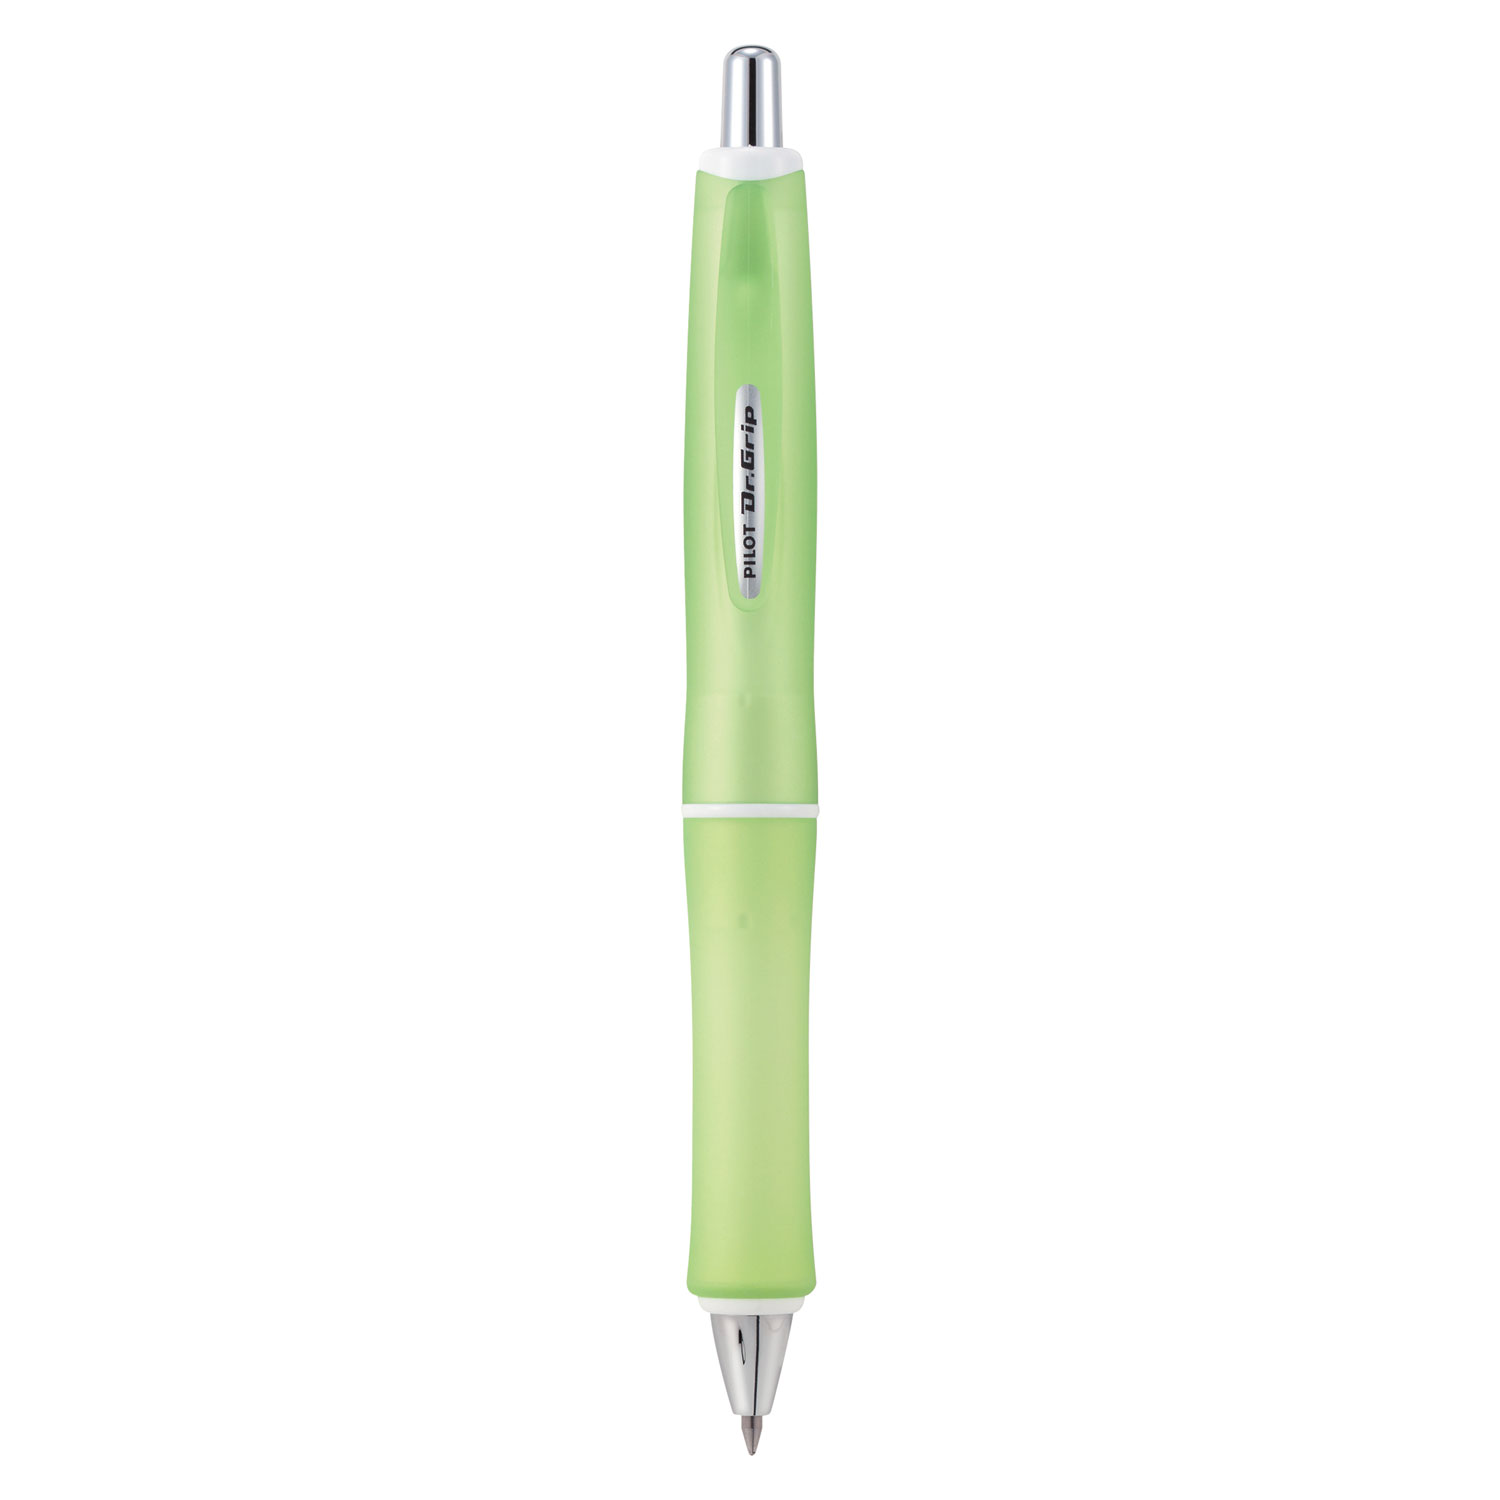 Dr. Grip Frosted Retractable Ballpoint Pen, 1mm, Black Ink, Green Barrel